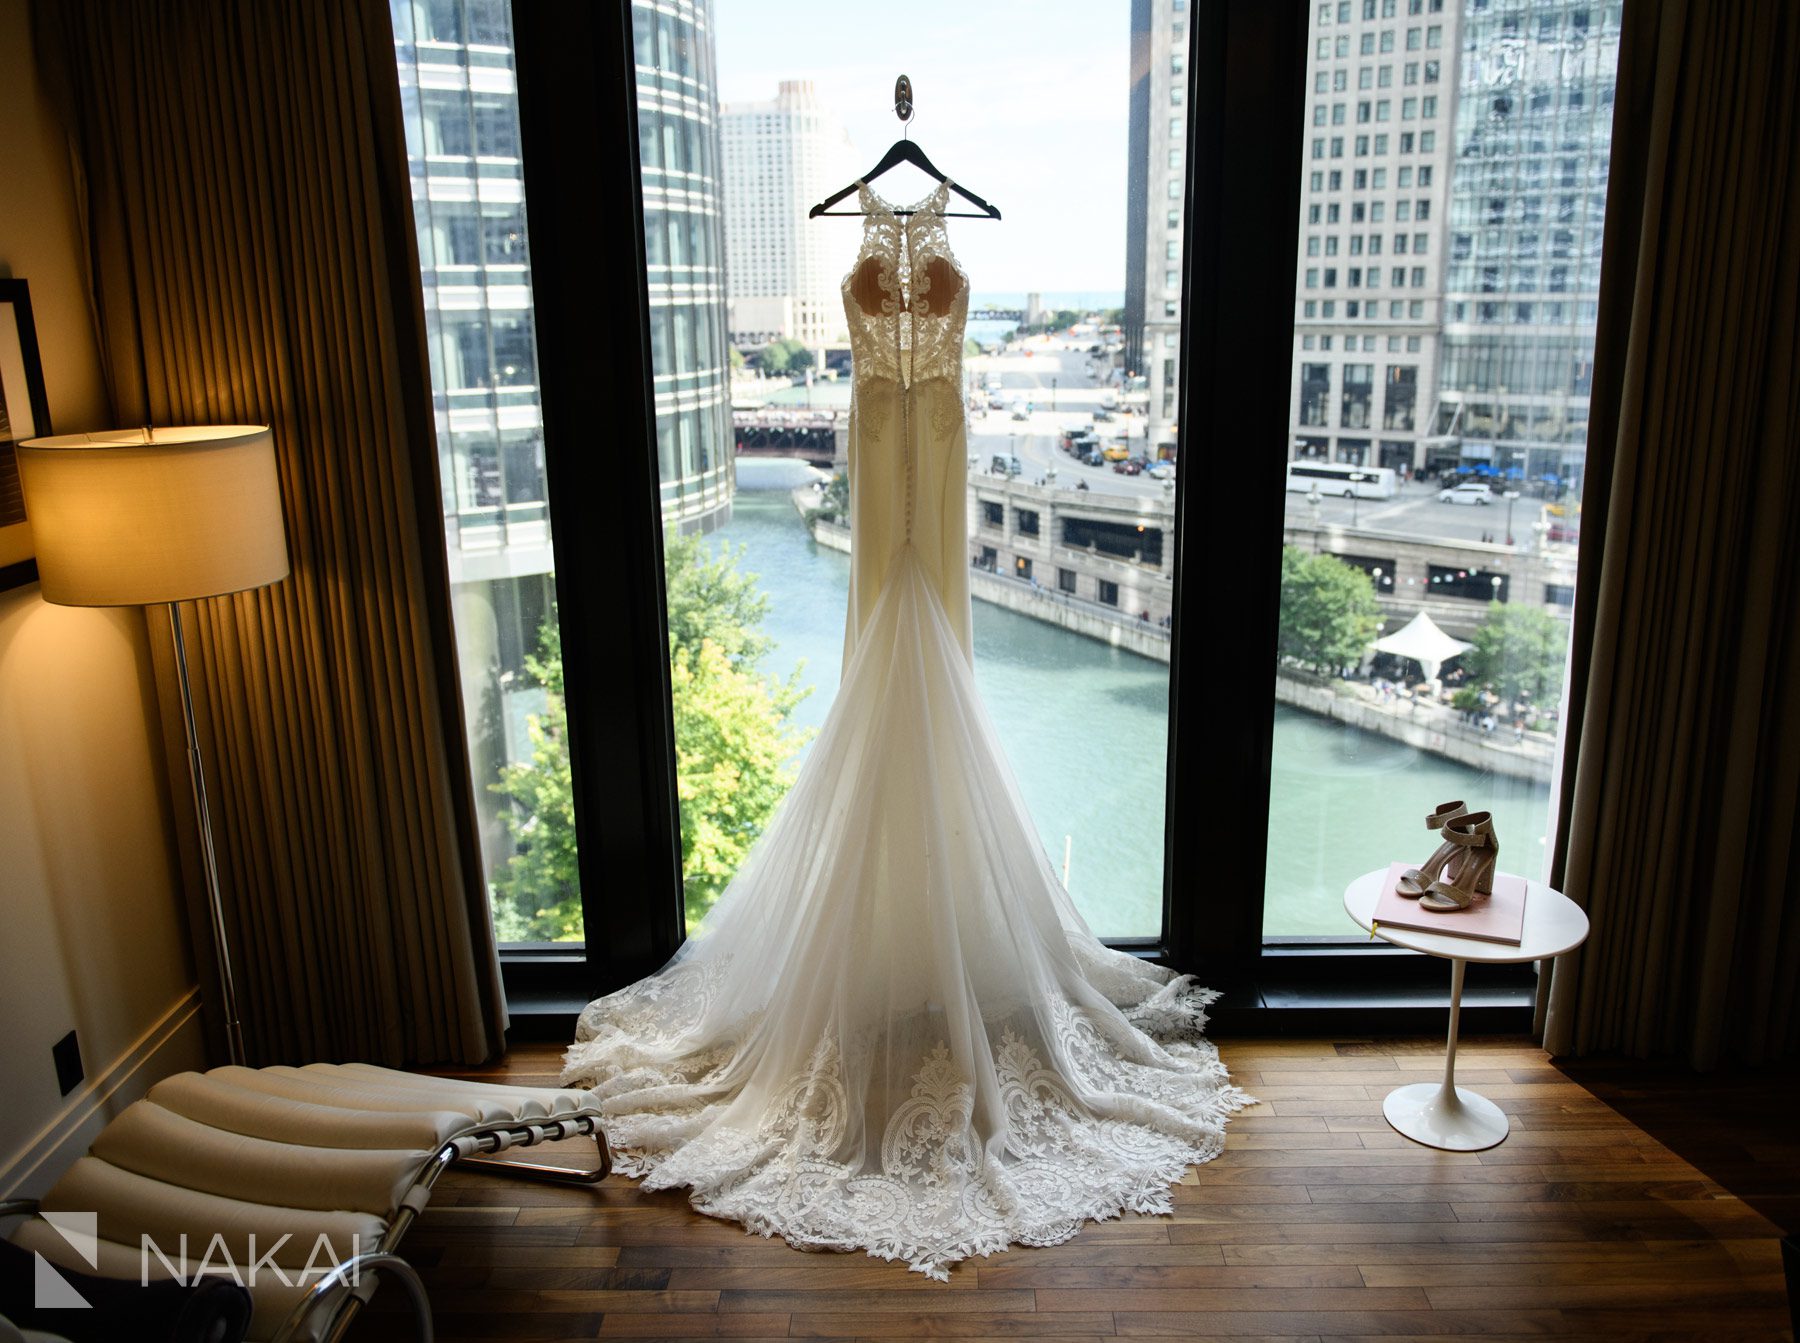 Langham Chicago wedding photography getting ready details